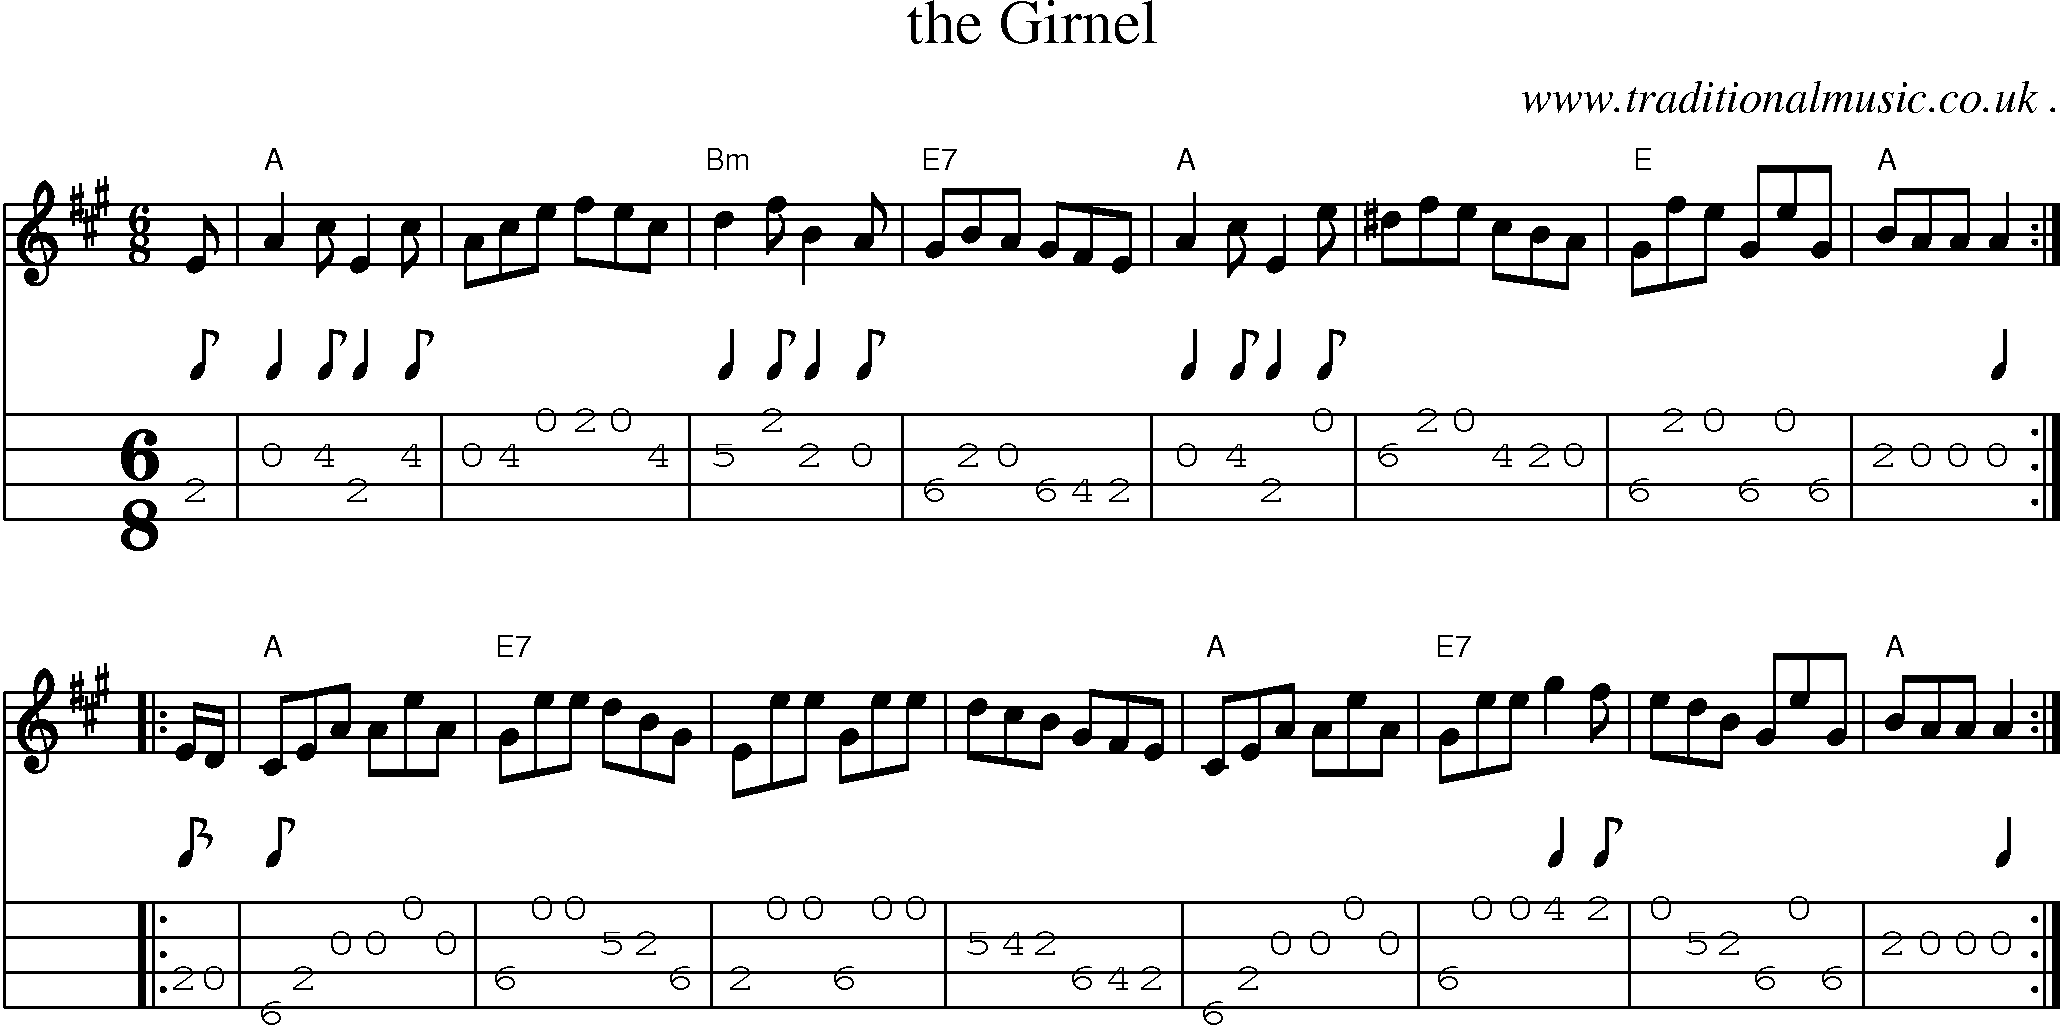 Sheet-music  score, Chords and Mandolin Tabs for The Girnel